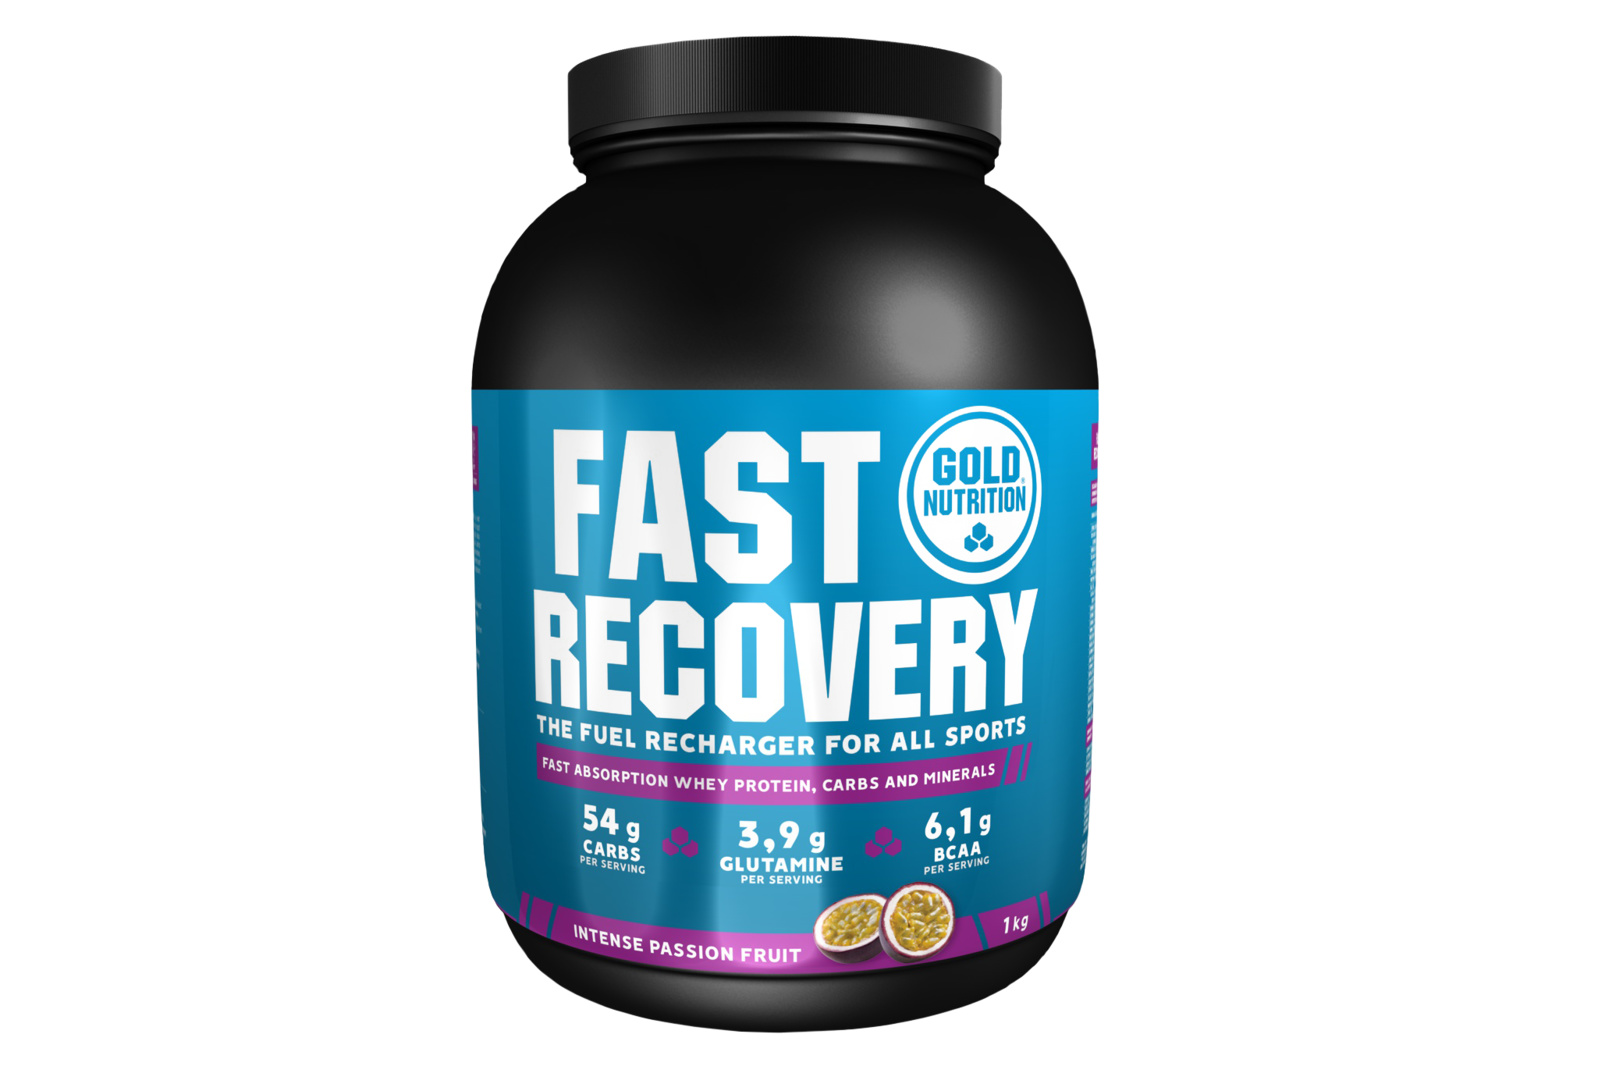 GOLDNUTRITION FAST RECOVERY FRUCTUL PASIUNII 1 KG